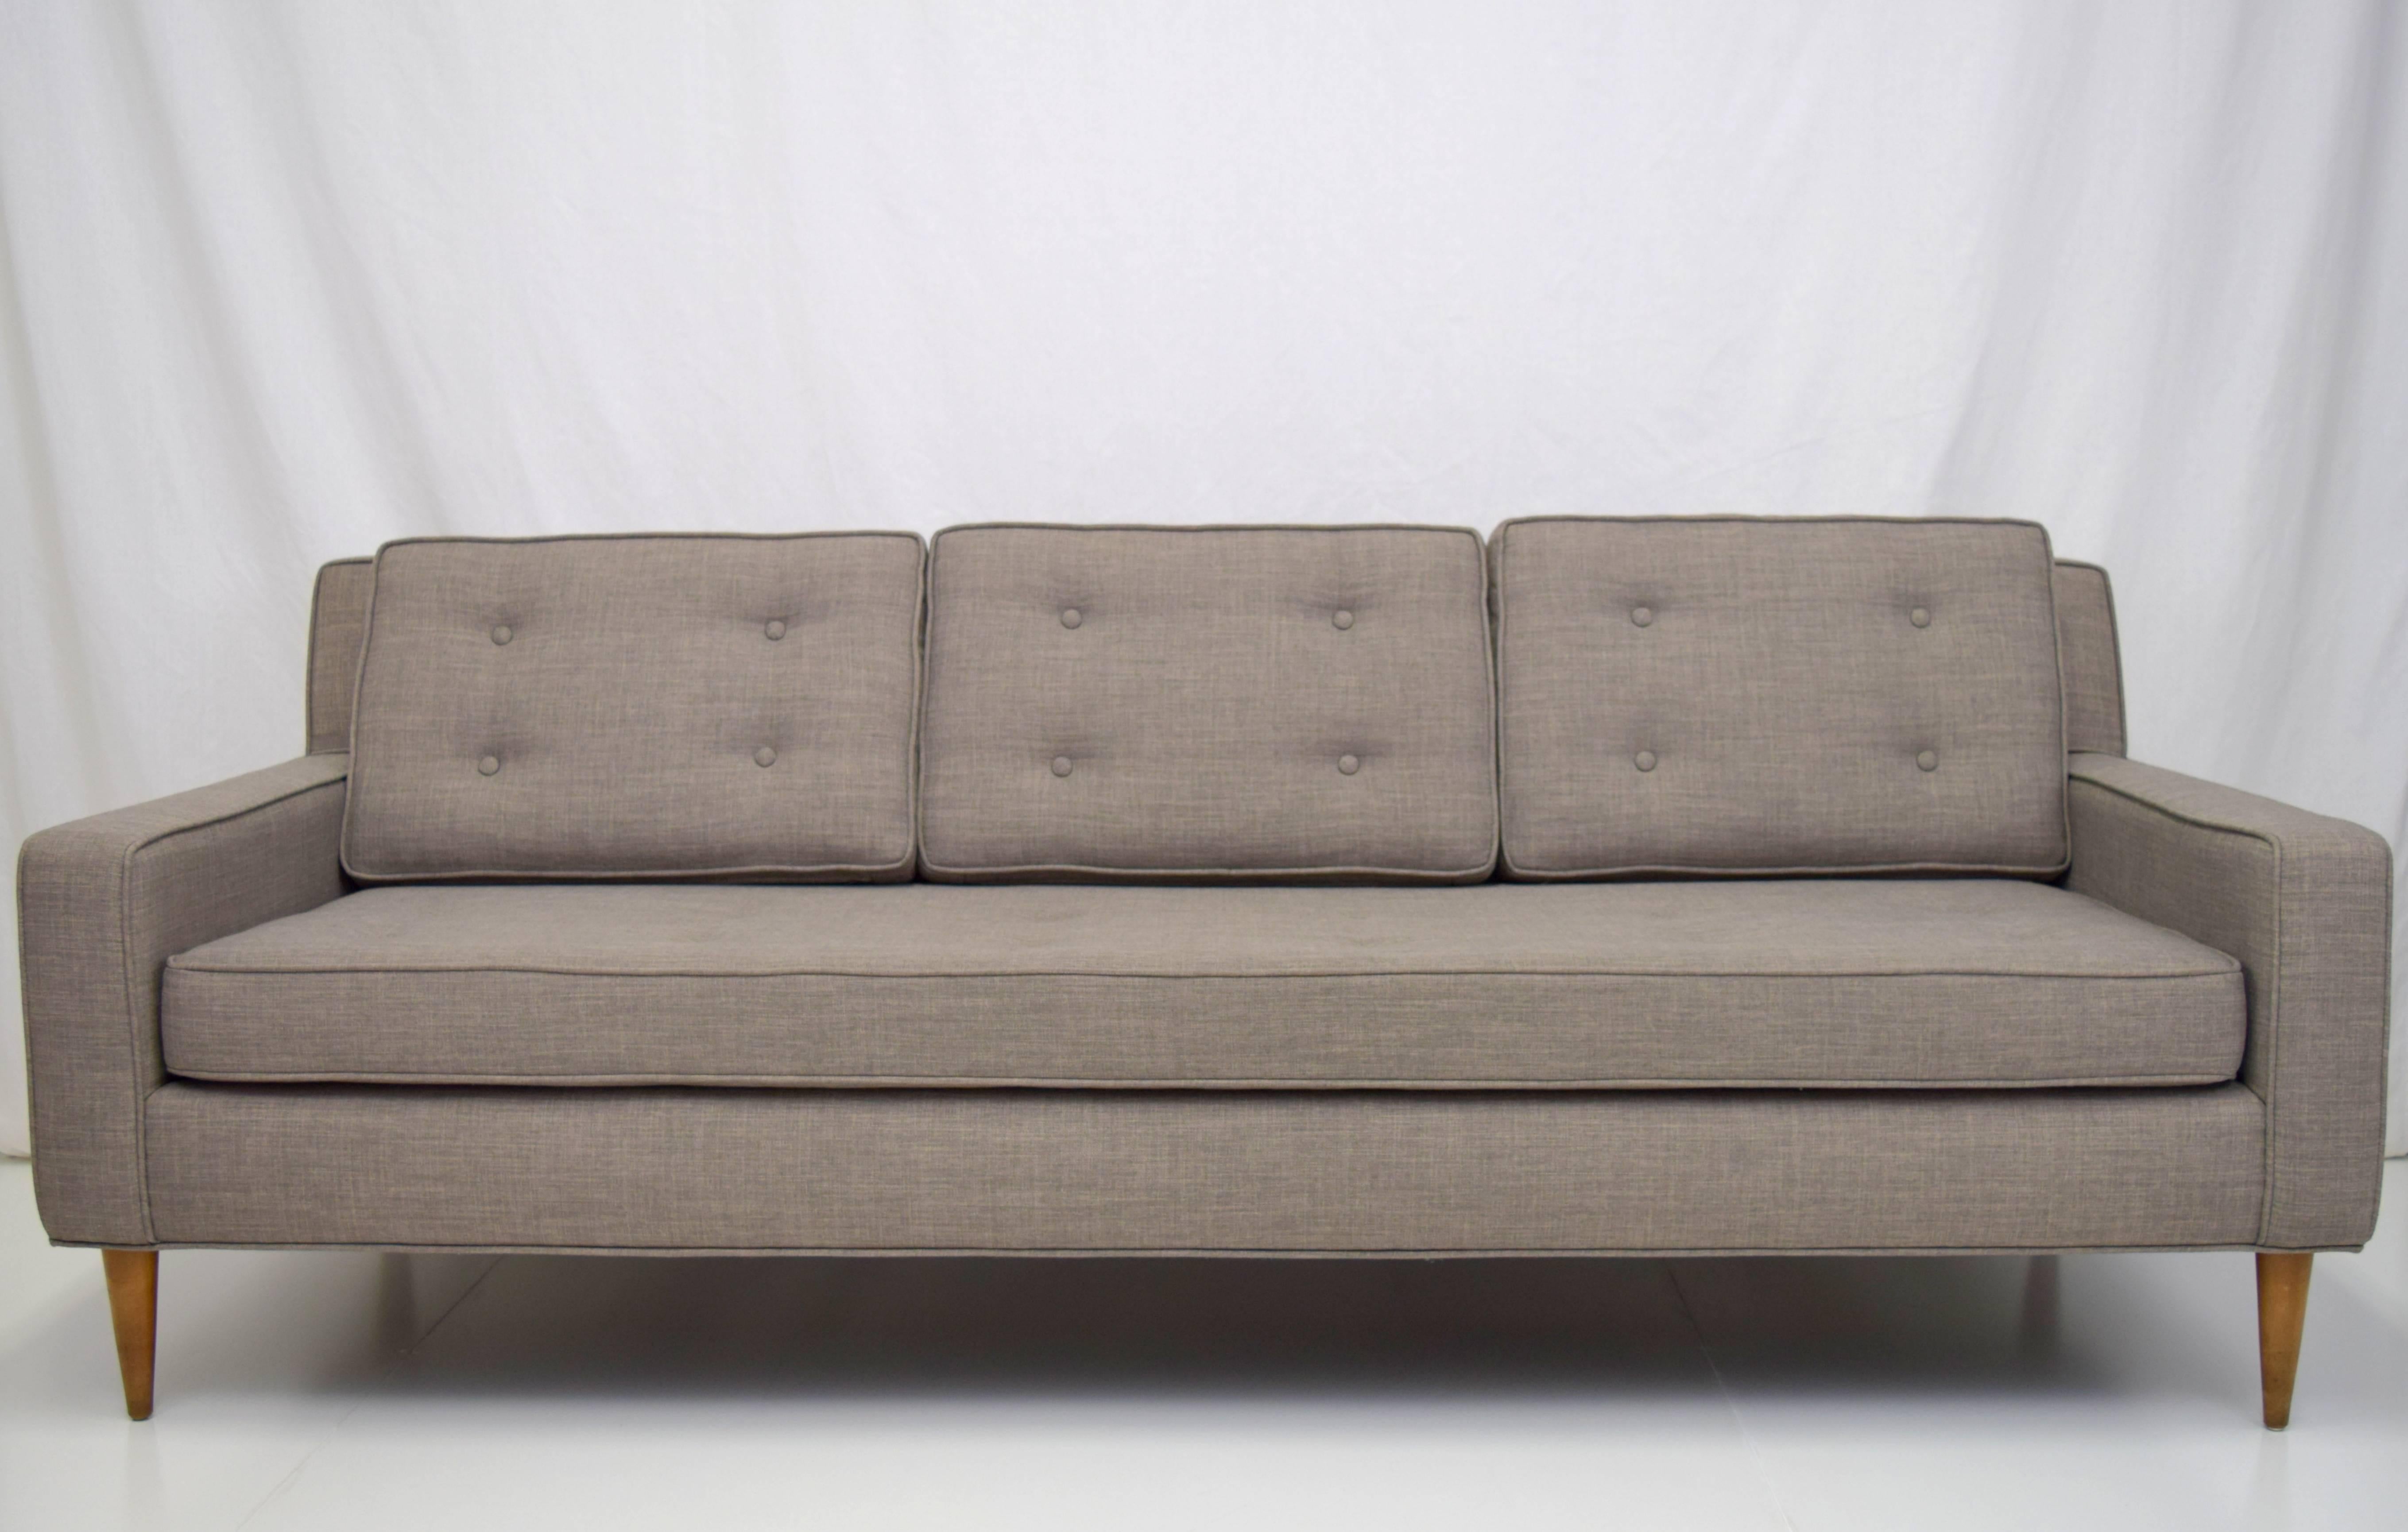 Perfectly scaled and proportioned button tufted sofa in the manner of Paul McCobb. Three back cushions over bench seat with conical legs. Upholstered in silver blue textured linen like fabric.